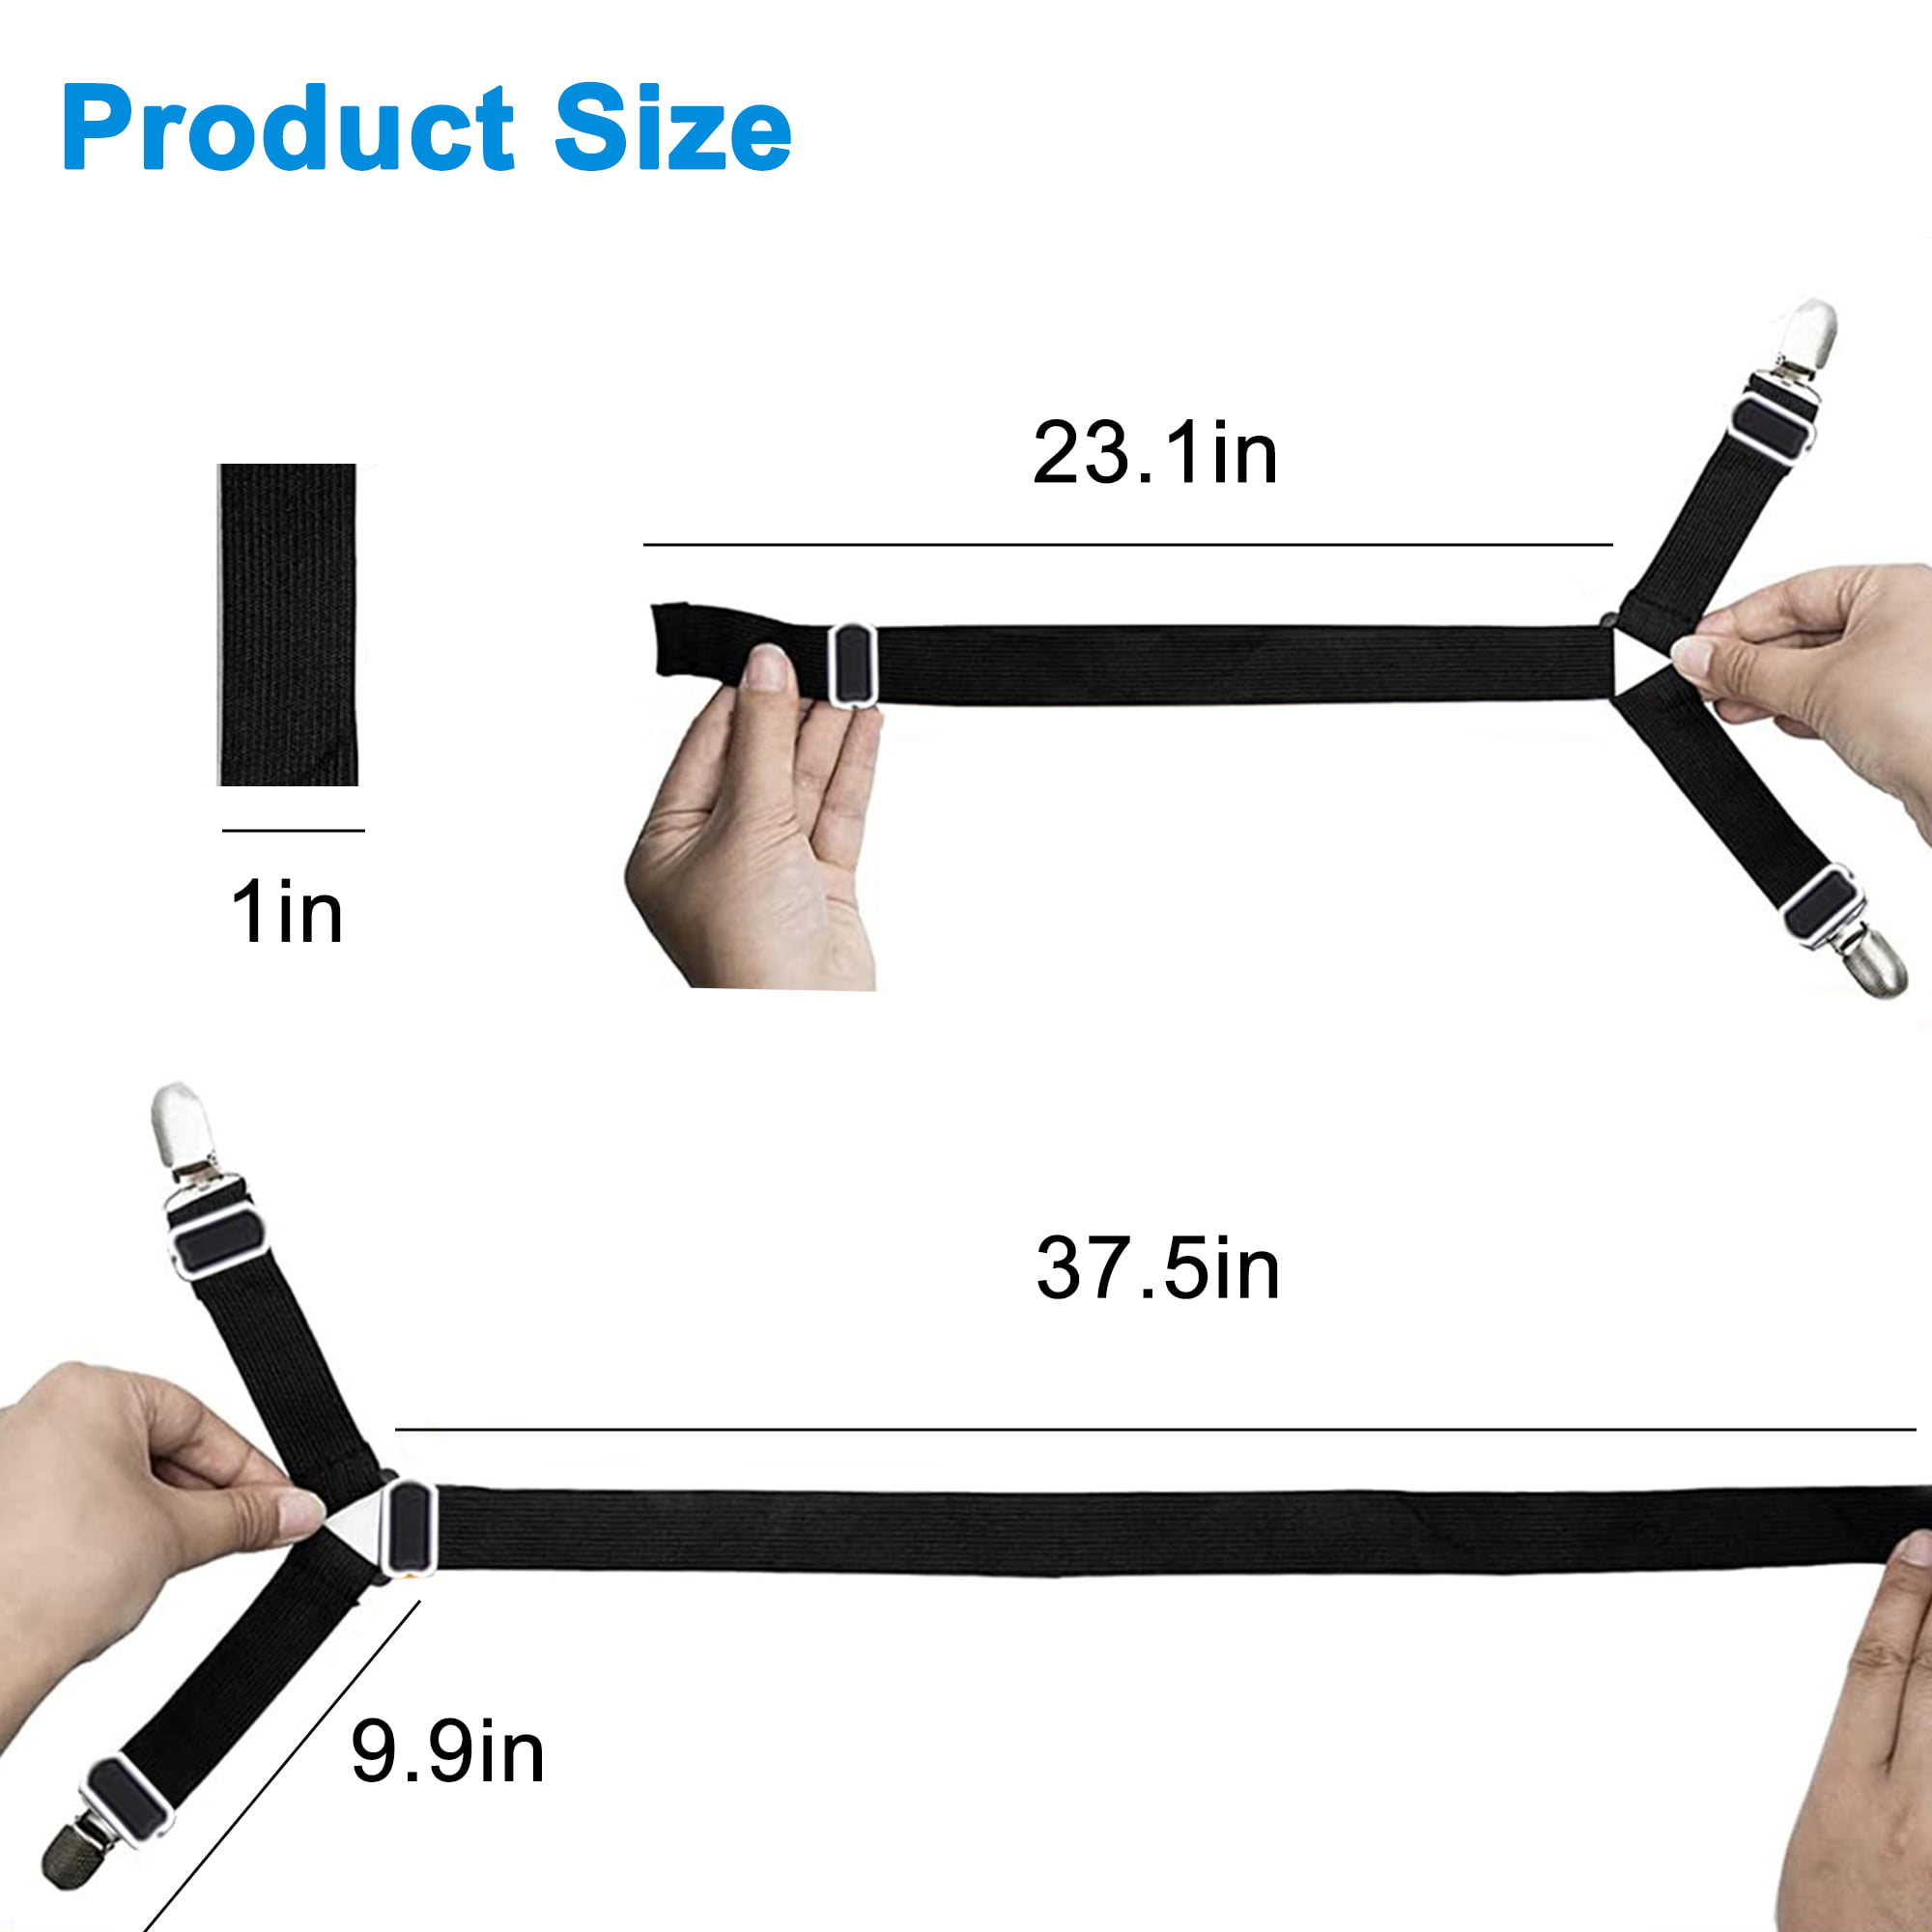 FeelAtHome Bed Sheet Holder Straps Criss-Cross - Sheets Stays Suspenders  Keeping Fitted Or Flat Bedsheet in Place - for Twin Queen King Mattress  Holders Elastic Clips Grippers Fasteners Garters Bands - Yahoo Shopping